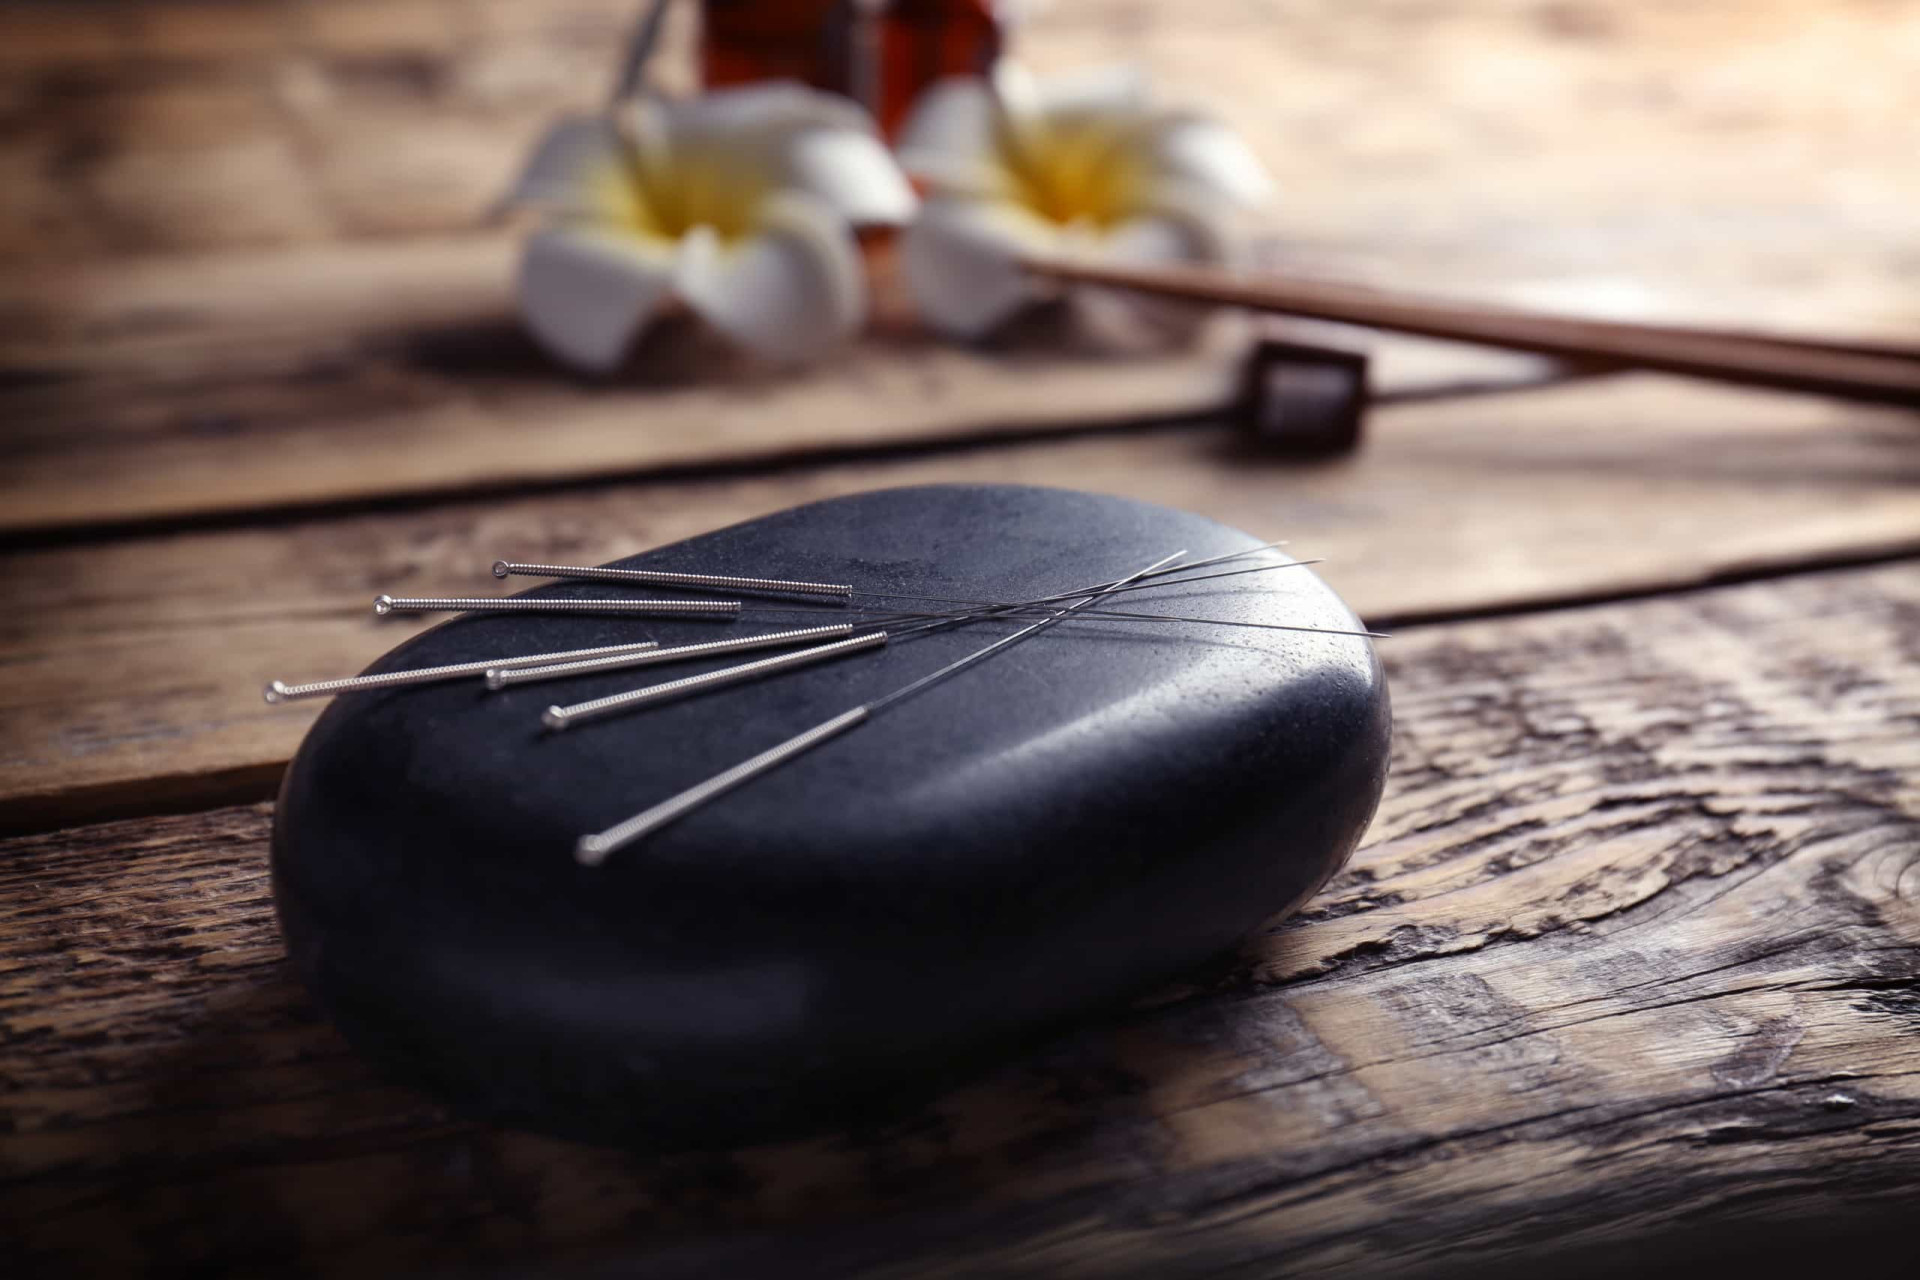 <p>Many people don't see acupuncture as a serious treatment, which is mainly due to misinformation. In fact, acupuncture needles are seen and treated as a medical device, and the acupuncturist has to have a proper license.</p><p><a href="https://www.msn.com/en-us/community/channel/vid-7xx8mnucu55yw63we9va2gwr7uihbxwc68fxqp25x6tg4ftibpra?cvid=94631541bc0f4f89bfd59158d696ad7e">Follow us and access great exclusive content every day</a></p>